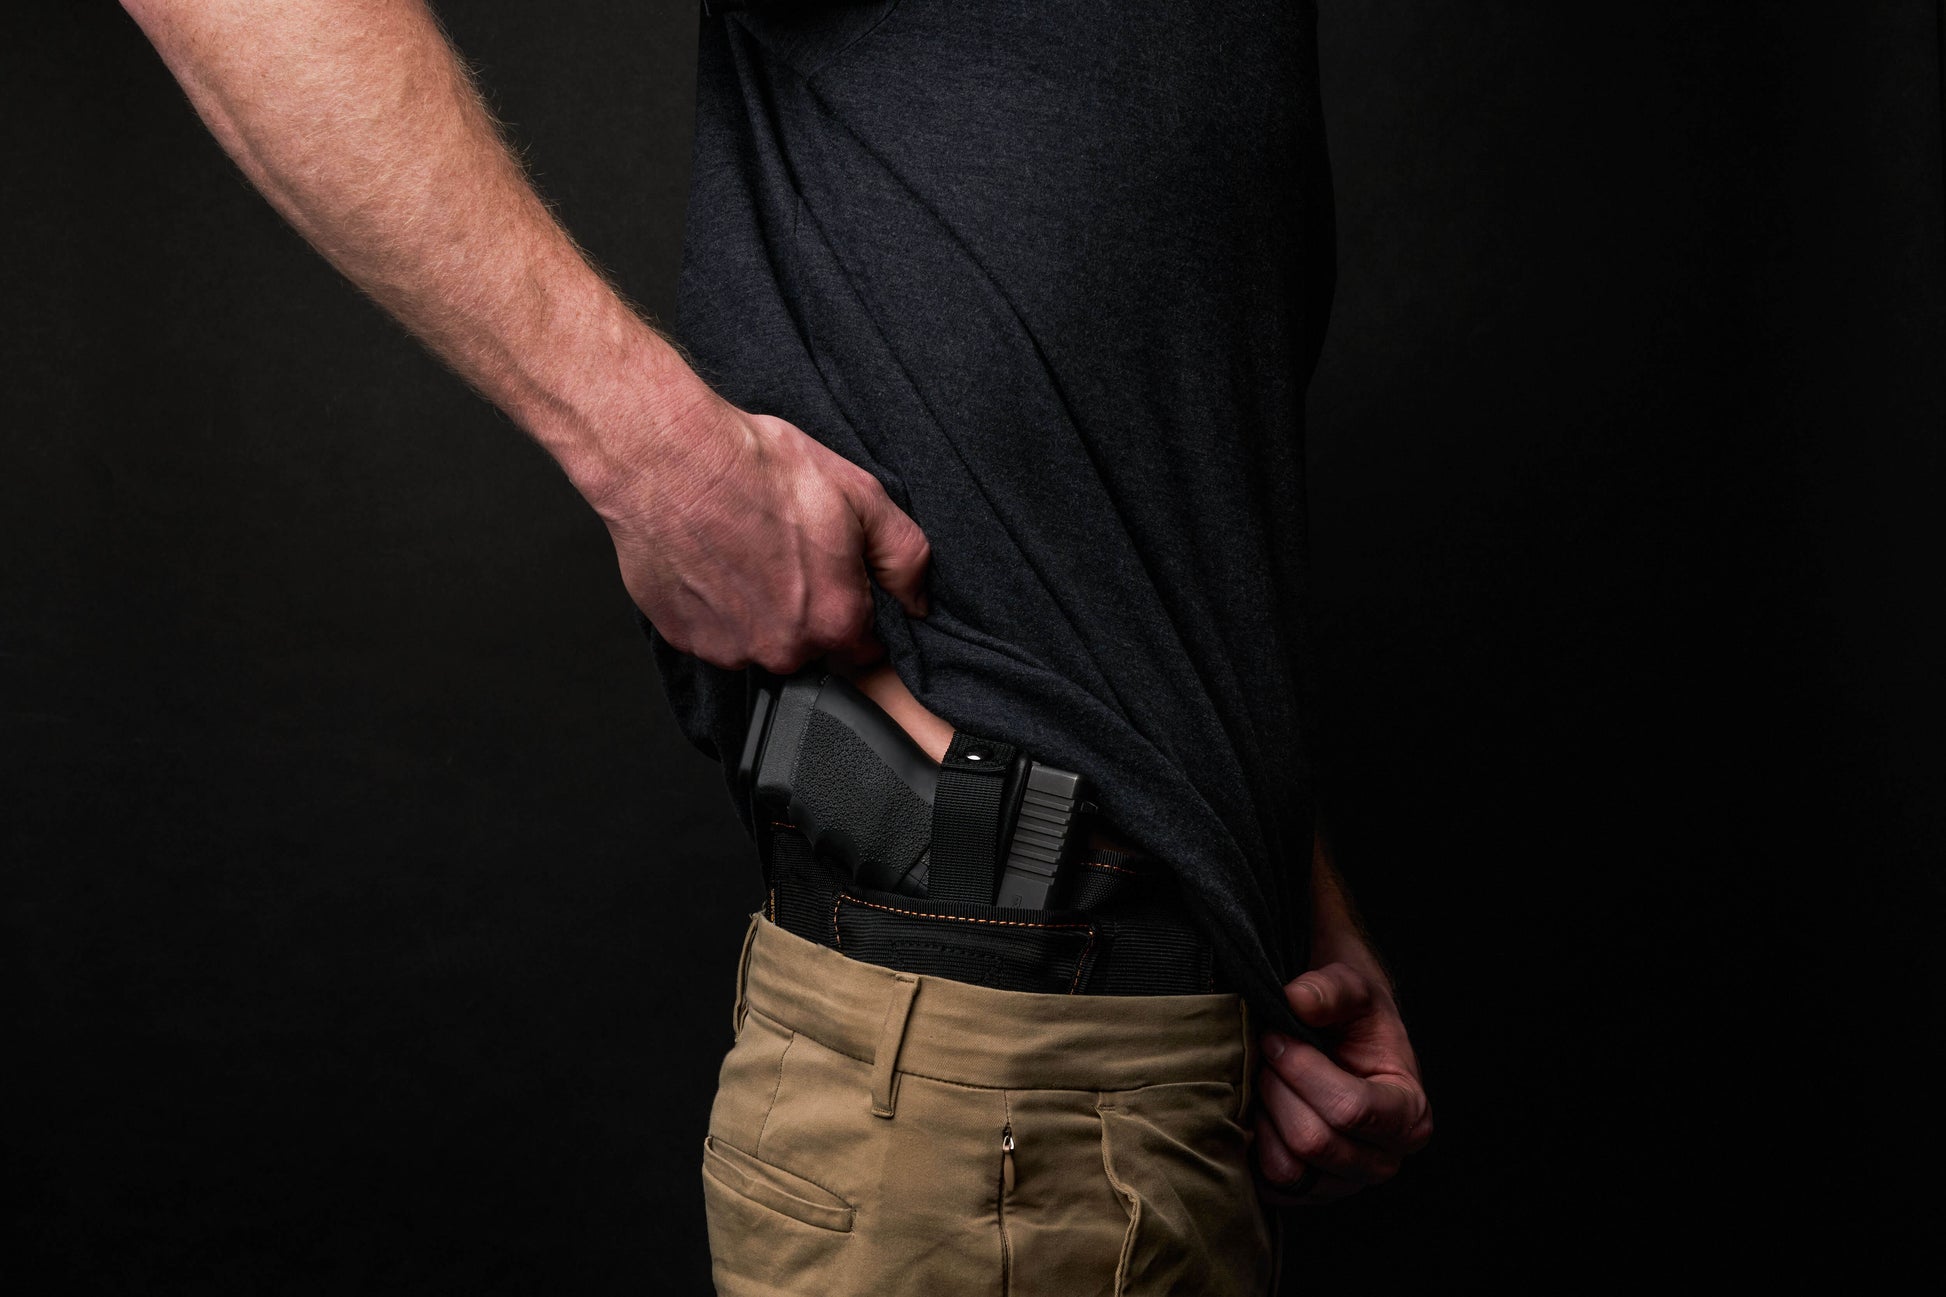 Sideview of a man wearing the VNSH Black Holster with a gun in it